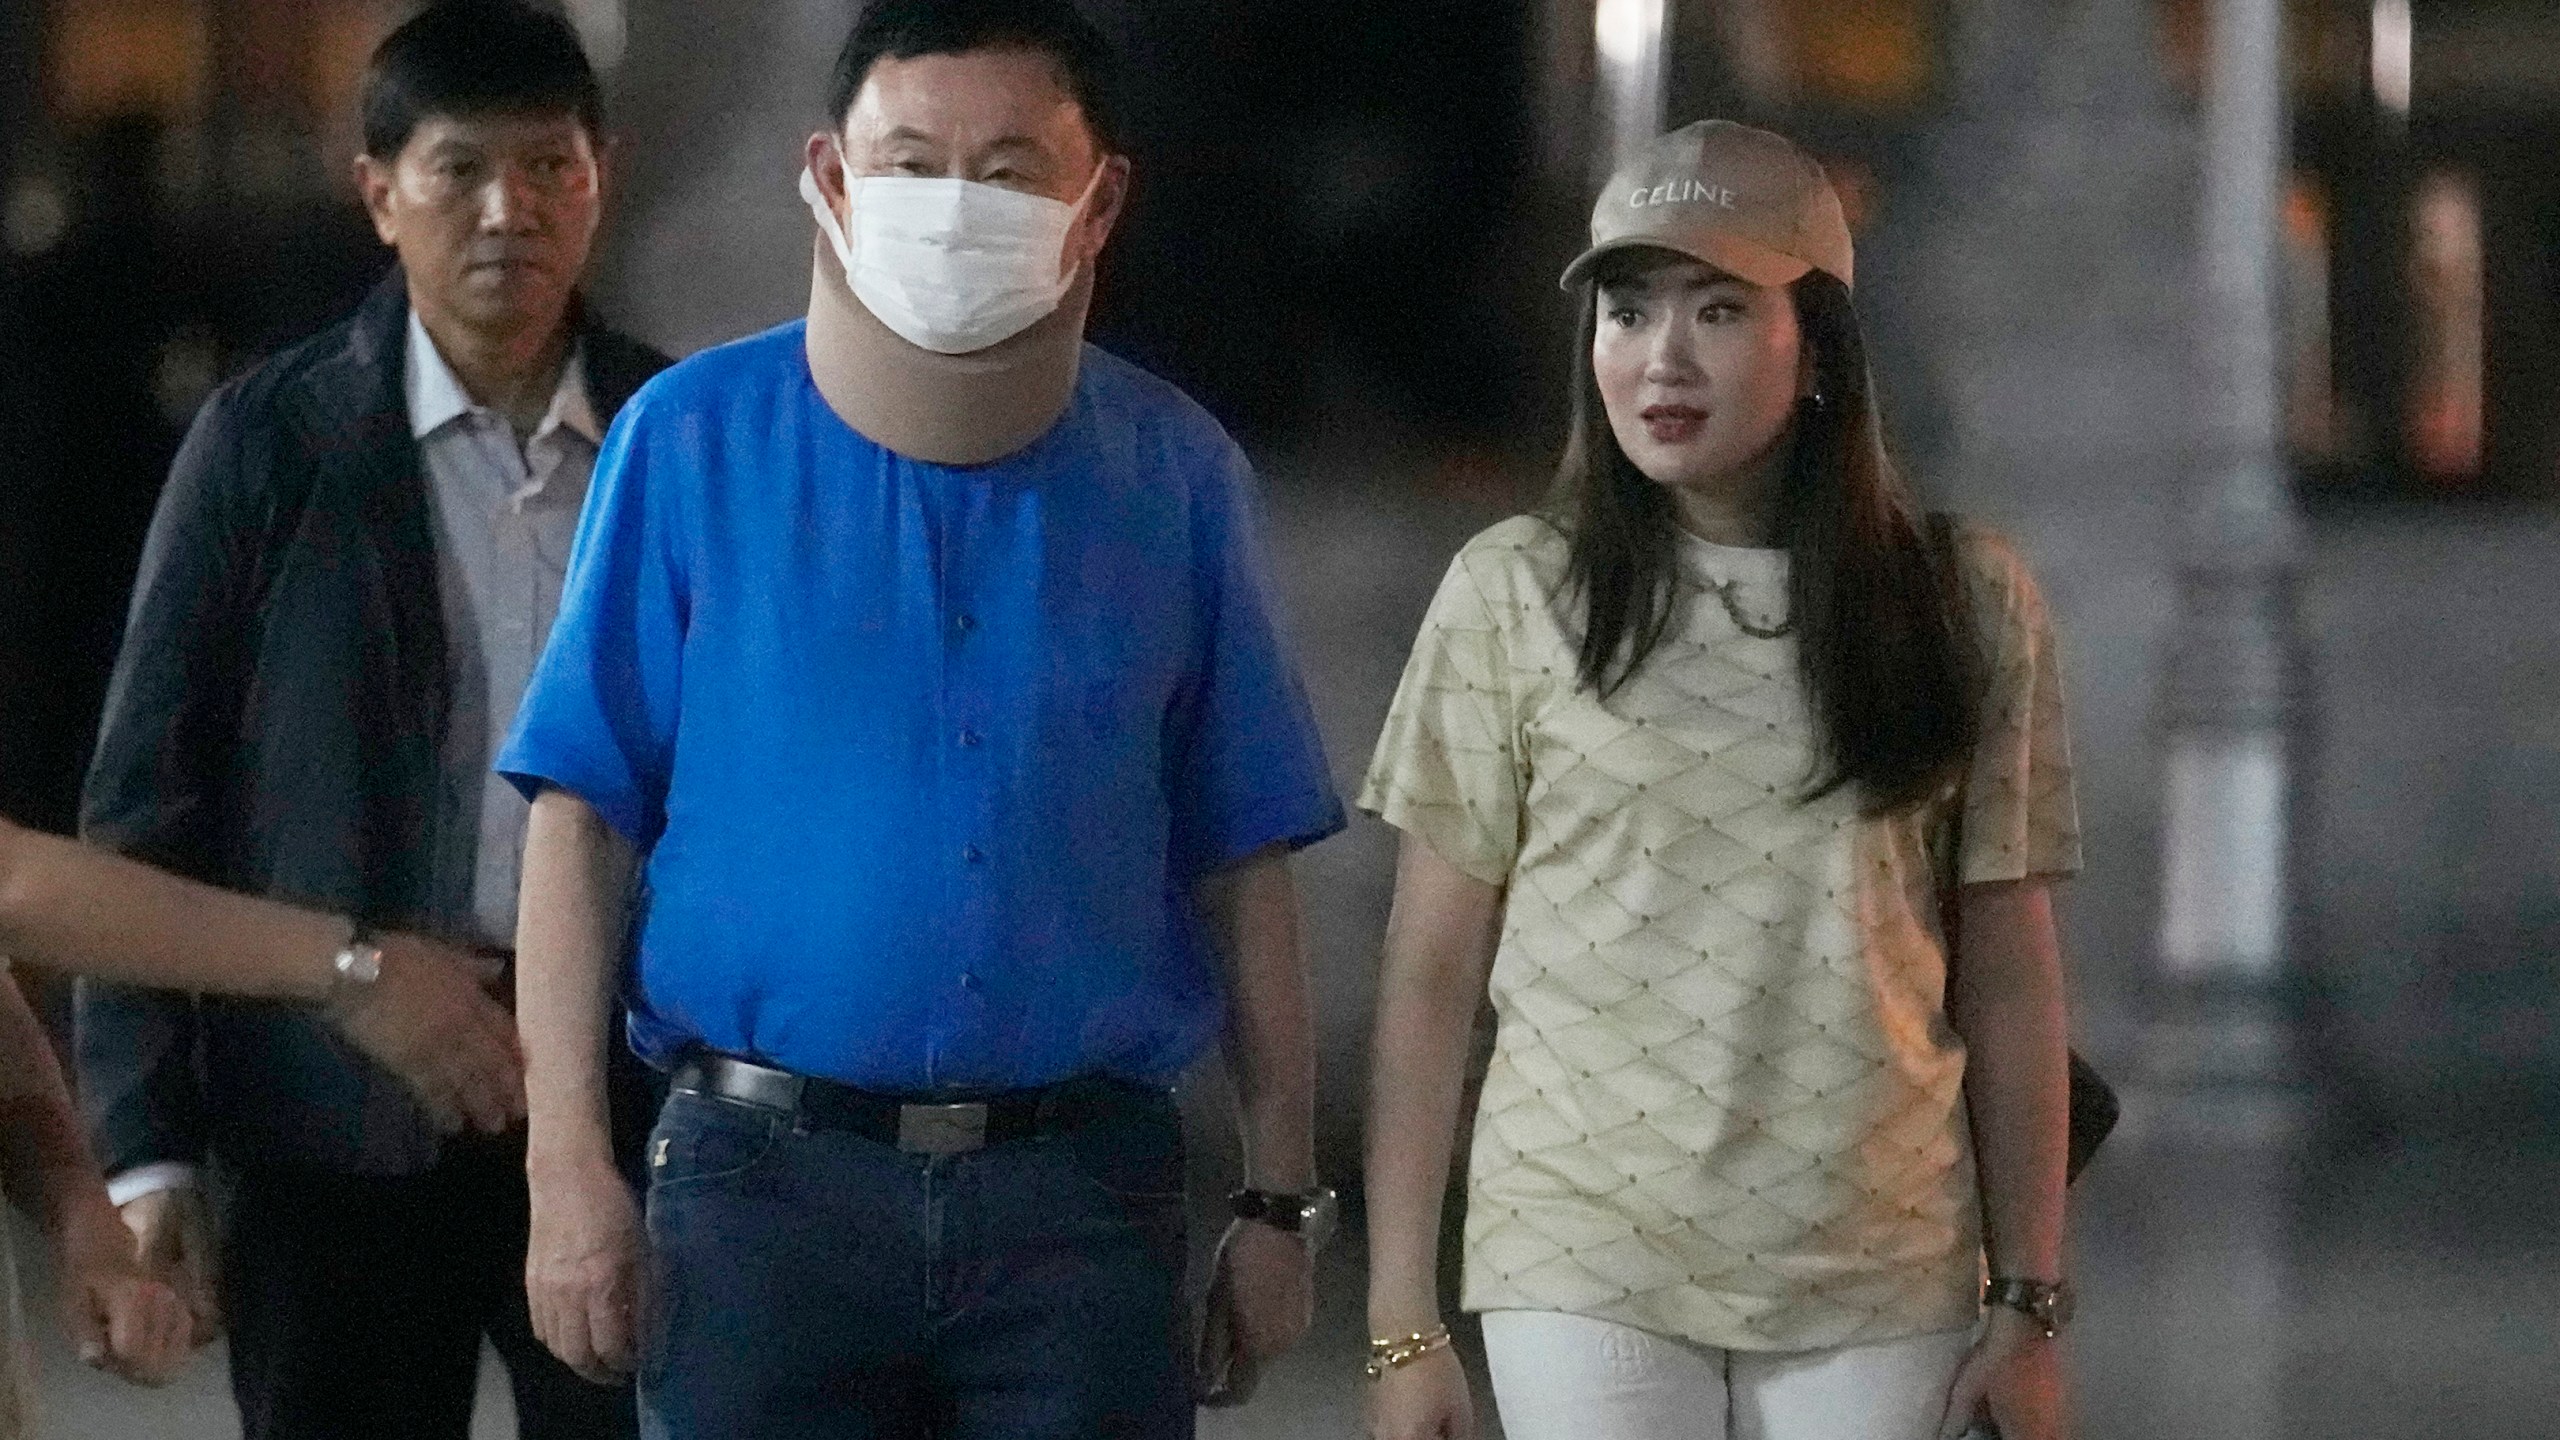 Former Thai Prime Minister Thaksin Shinawatra, center, and his daughter Paetongtarn Shinawatra, right, visit City Pillar Shrine in Bangkok, Thailand, Thursday, March 14, 2024. Earlier in February, he was released on parole from a hospital where he spent six months serving time for corruption-related offenses. (AP Photo/Sakchai Lalit)